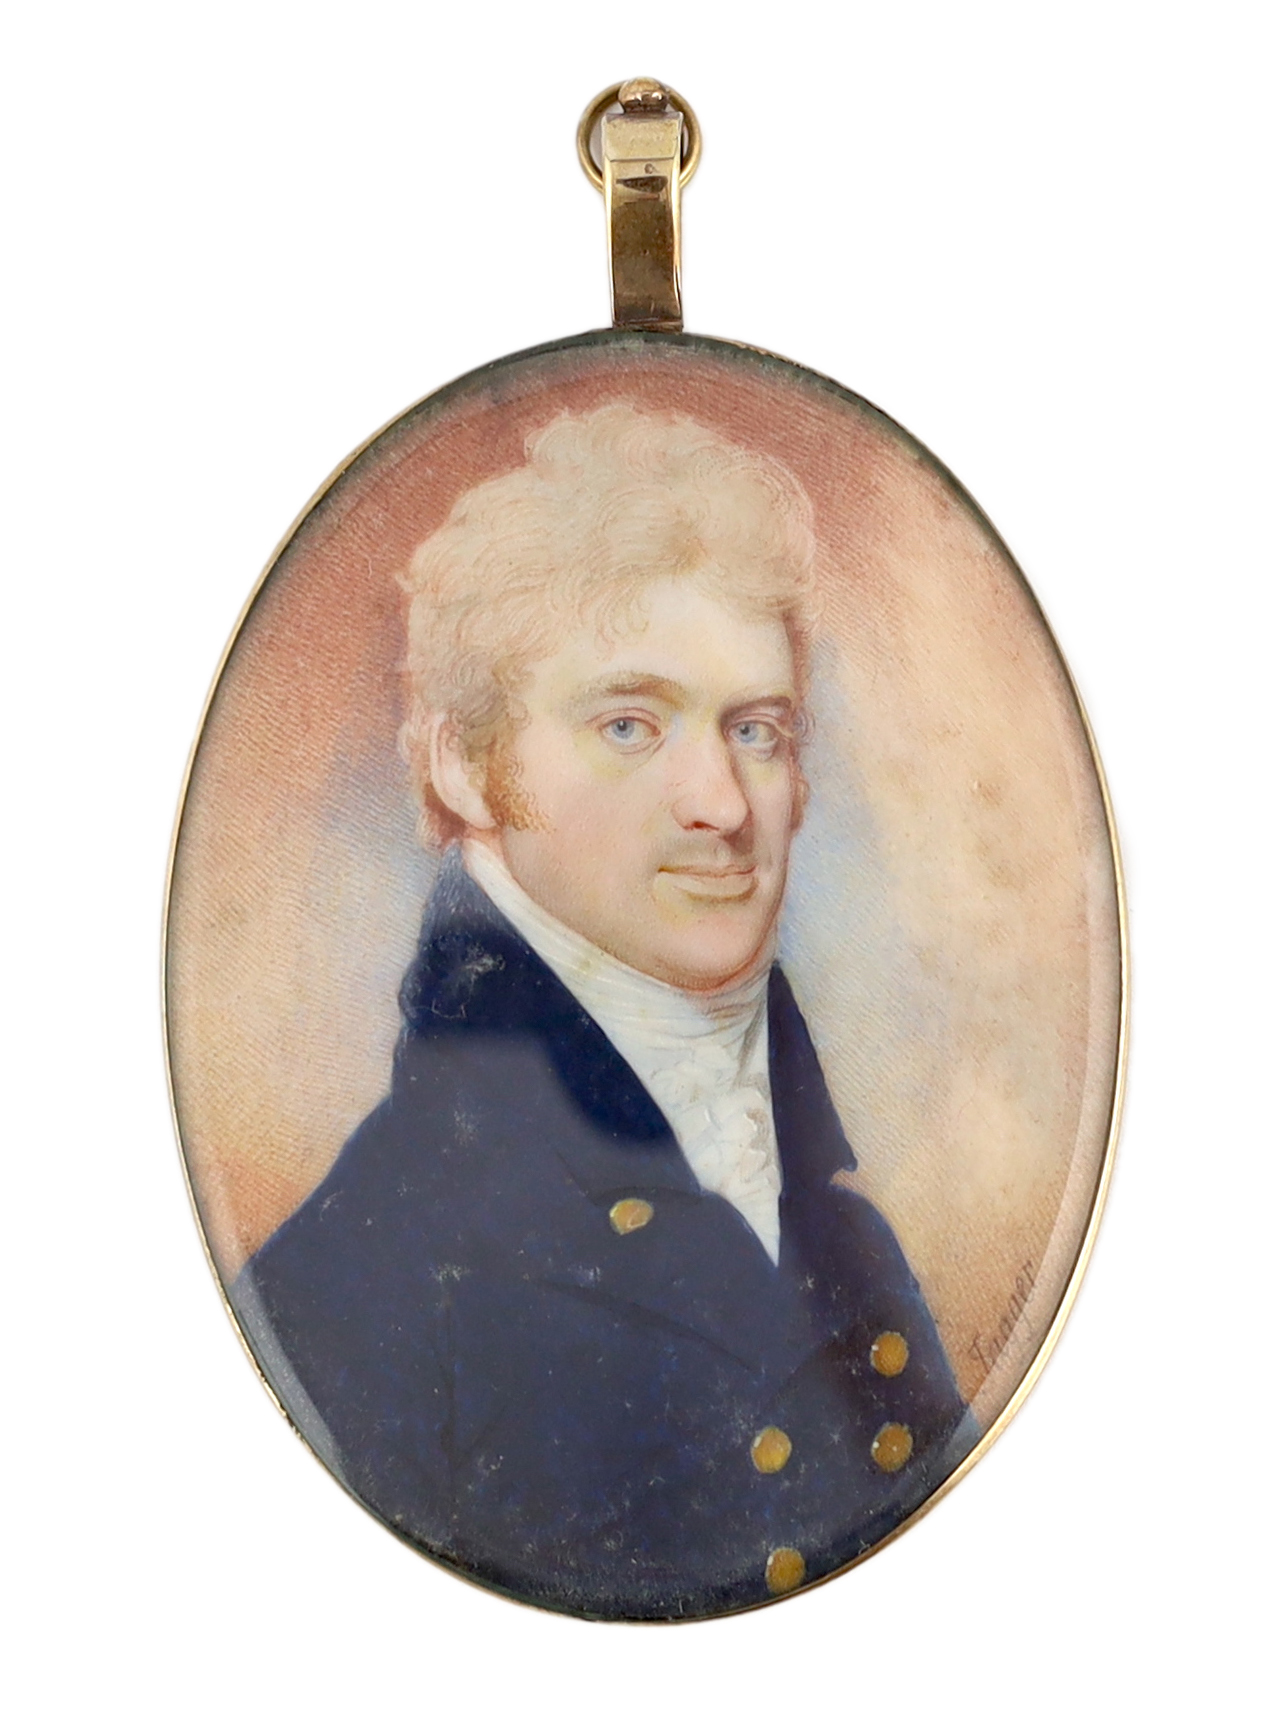 Charles Jagger (English, 1770-1827), Portrait miniature of a gentleman, watercolour on ivory, 6.8 x 5cm. CITES Submission reference JGPFPJ39